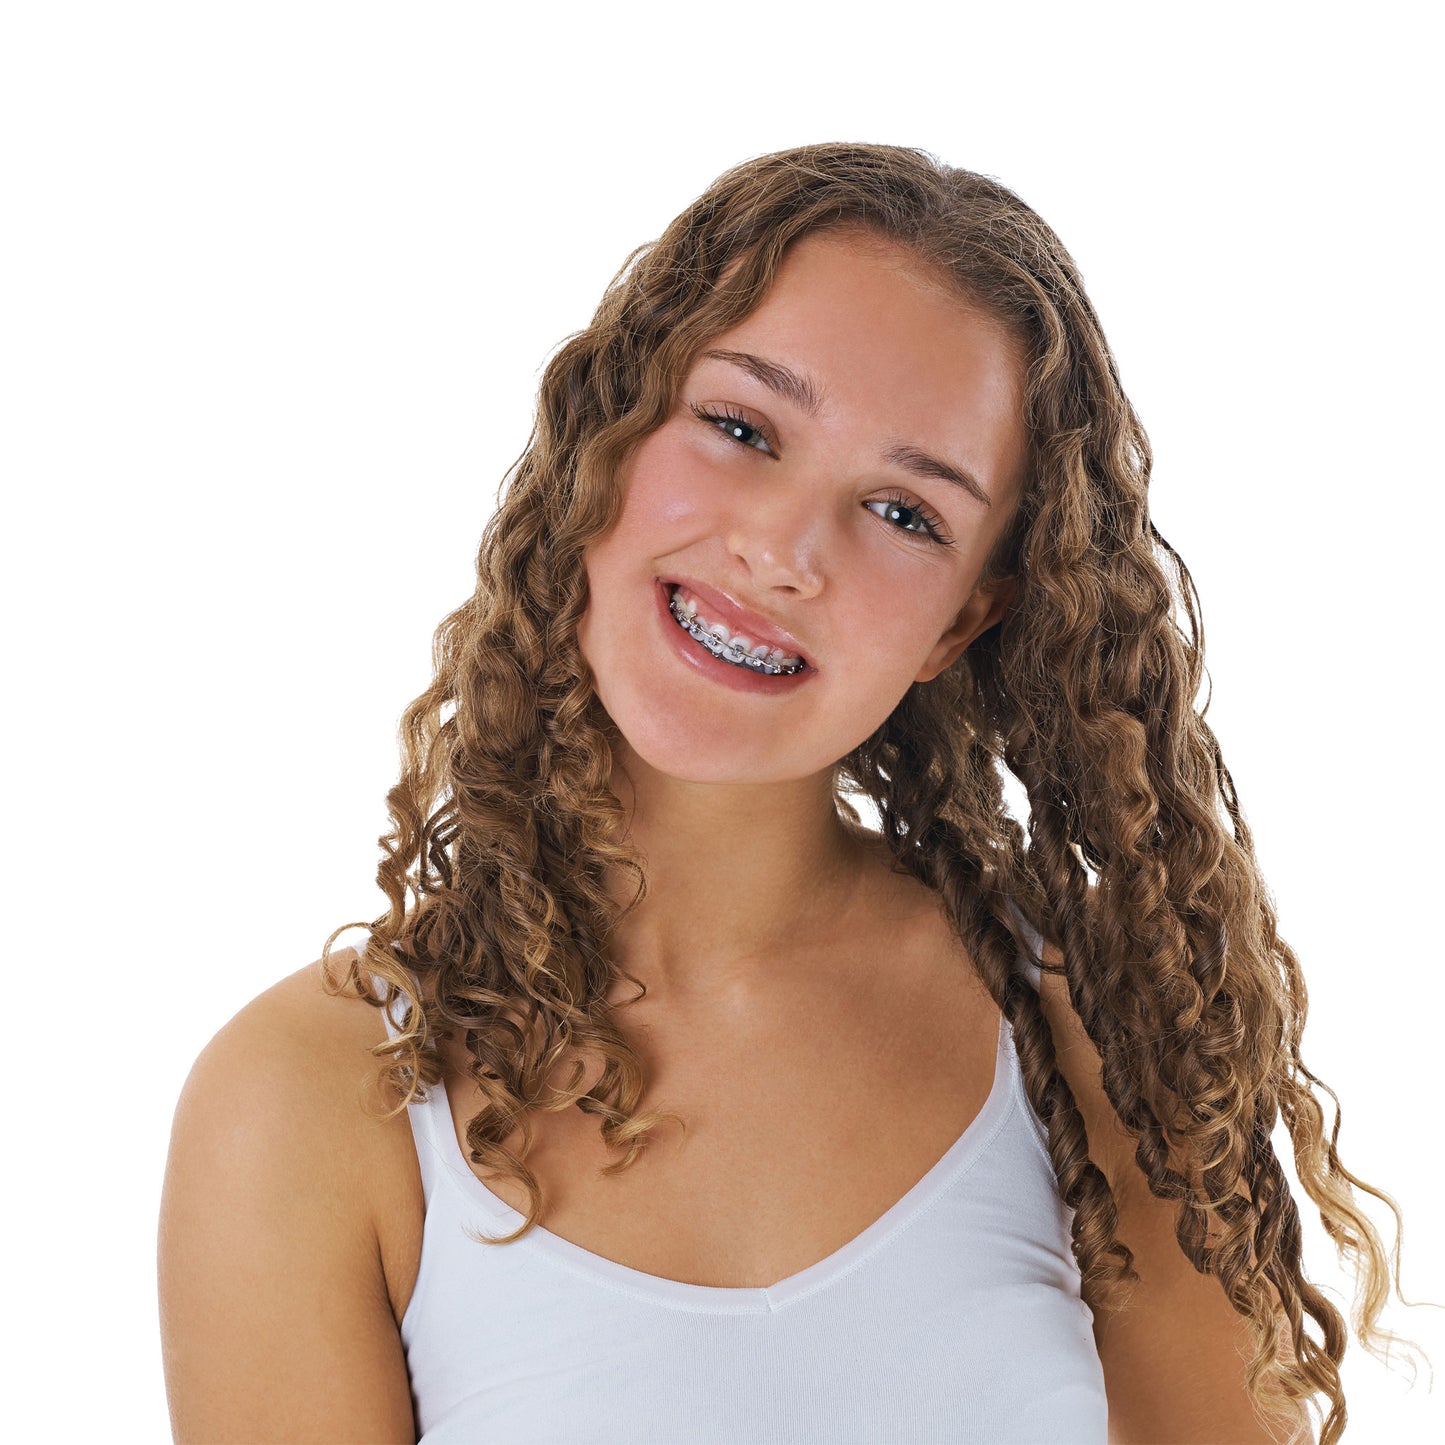 Smiling teen with self ligating brackets